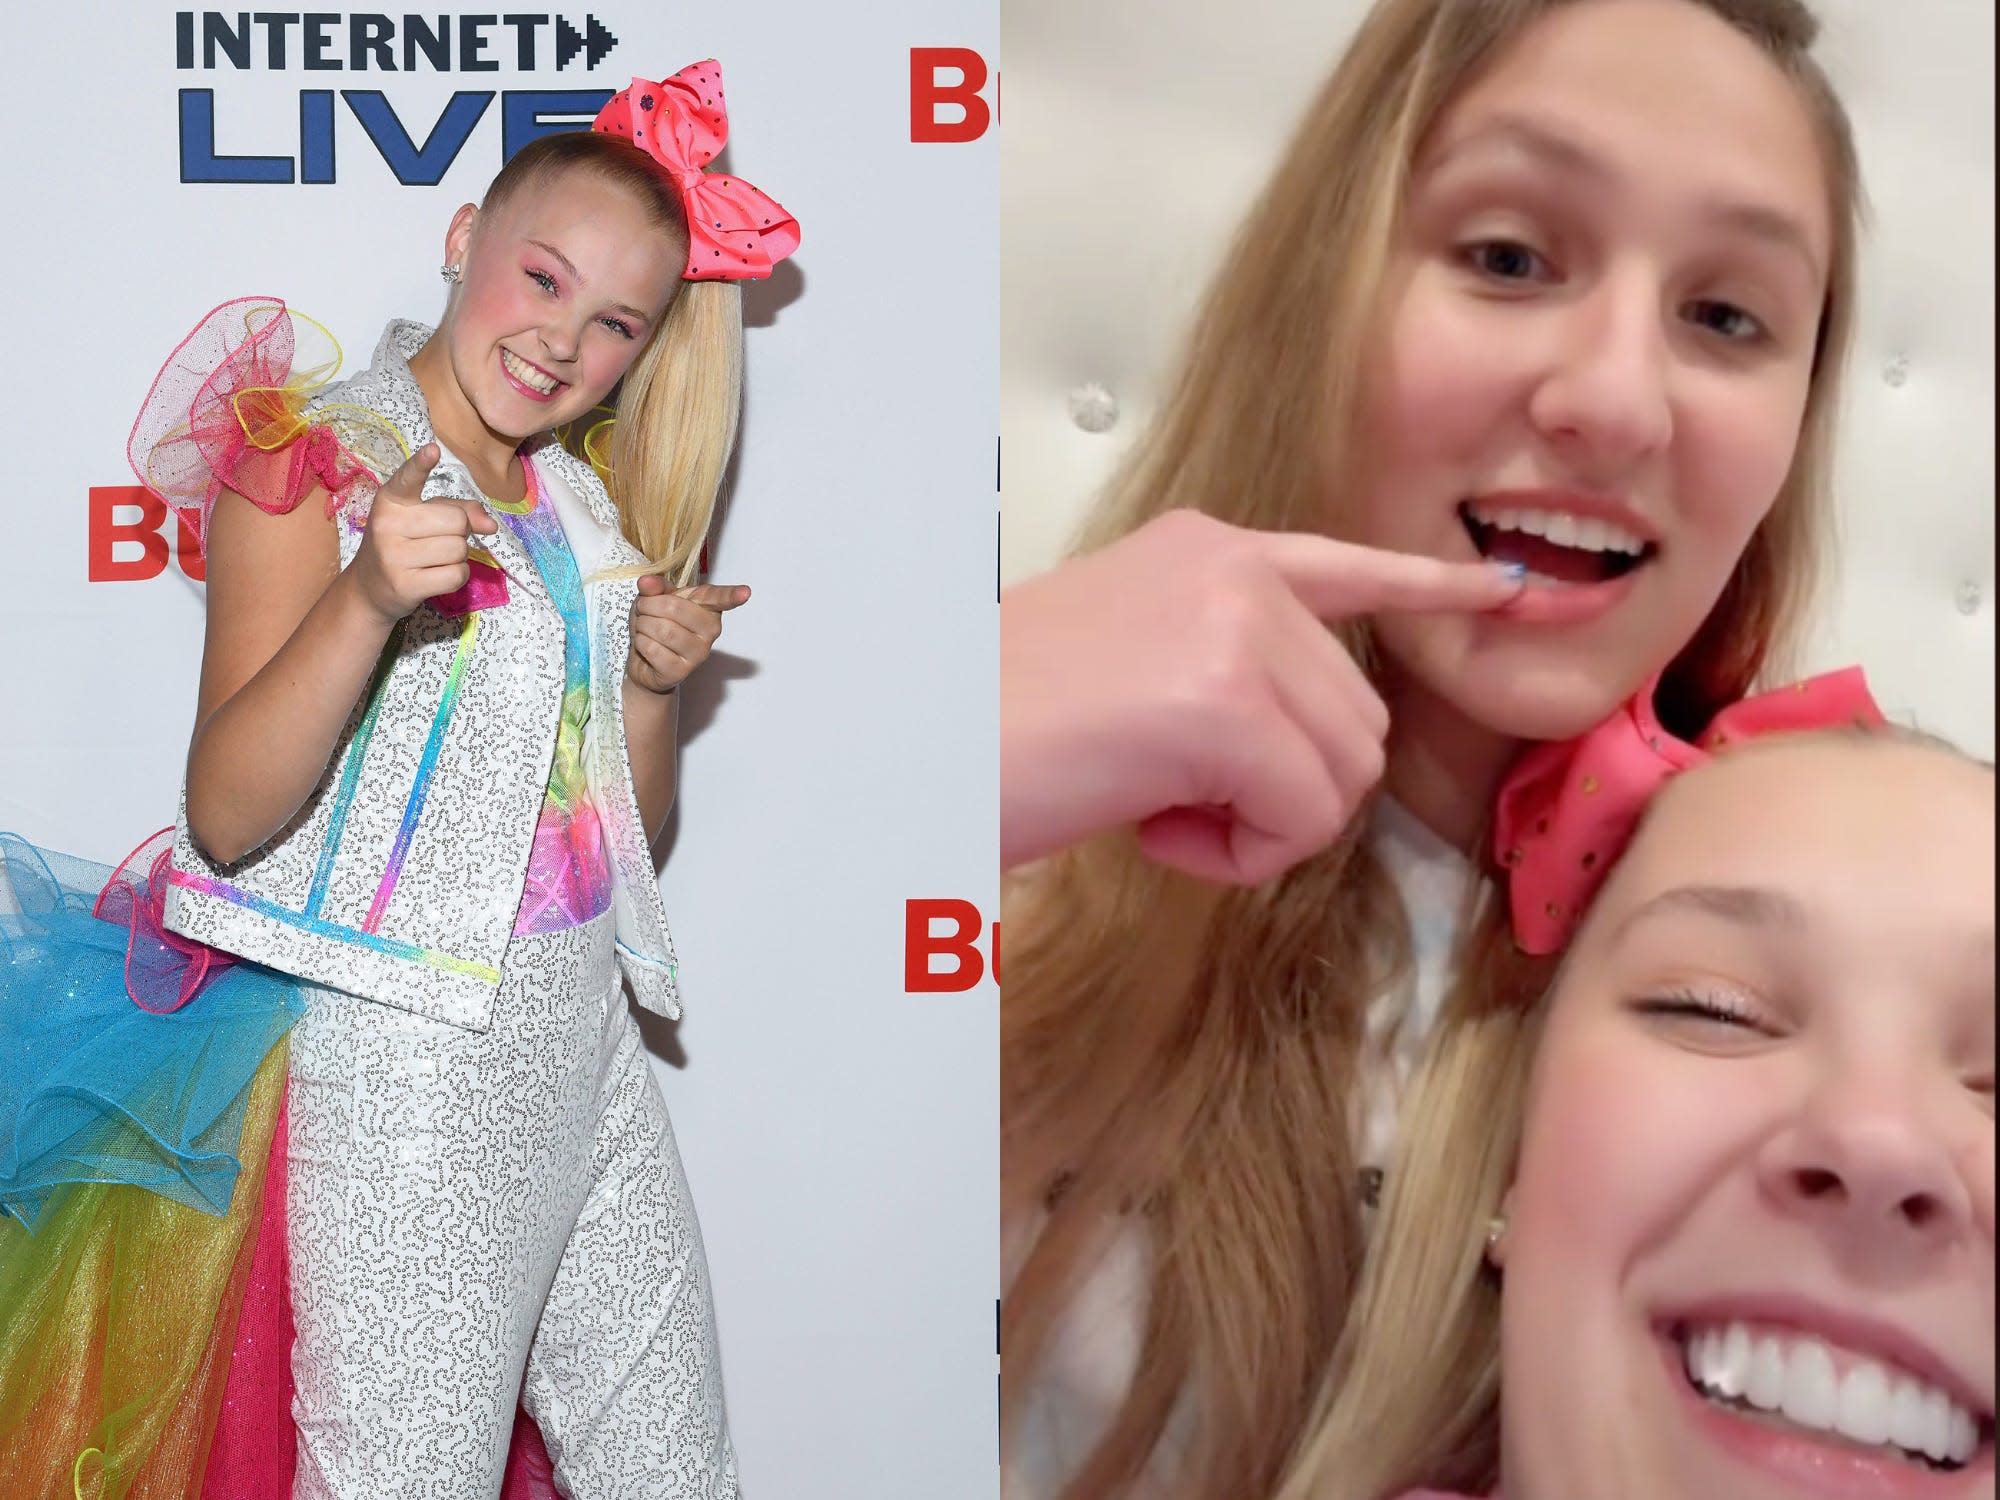 JoJo Siwa posted photos with her girlfriend to mark their 1month